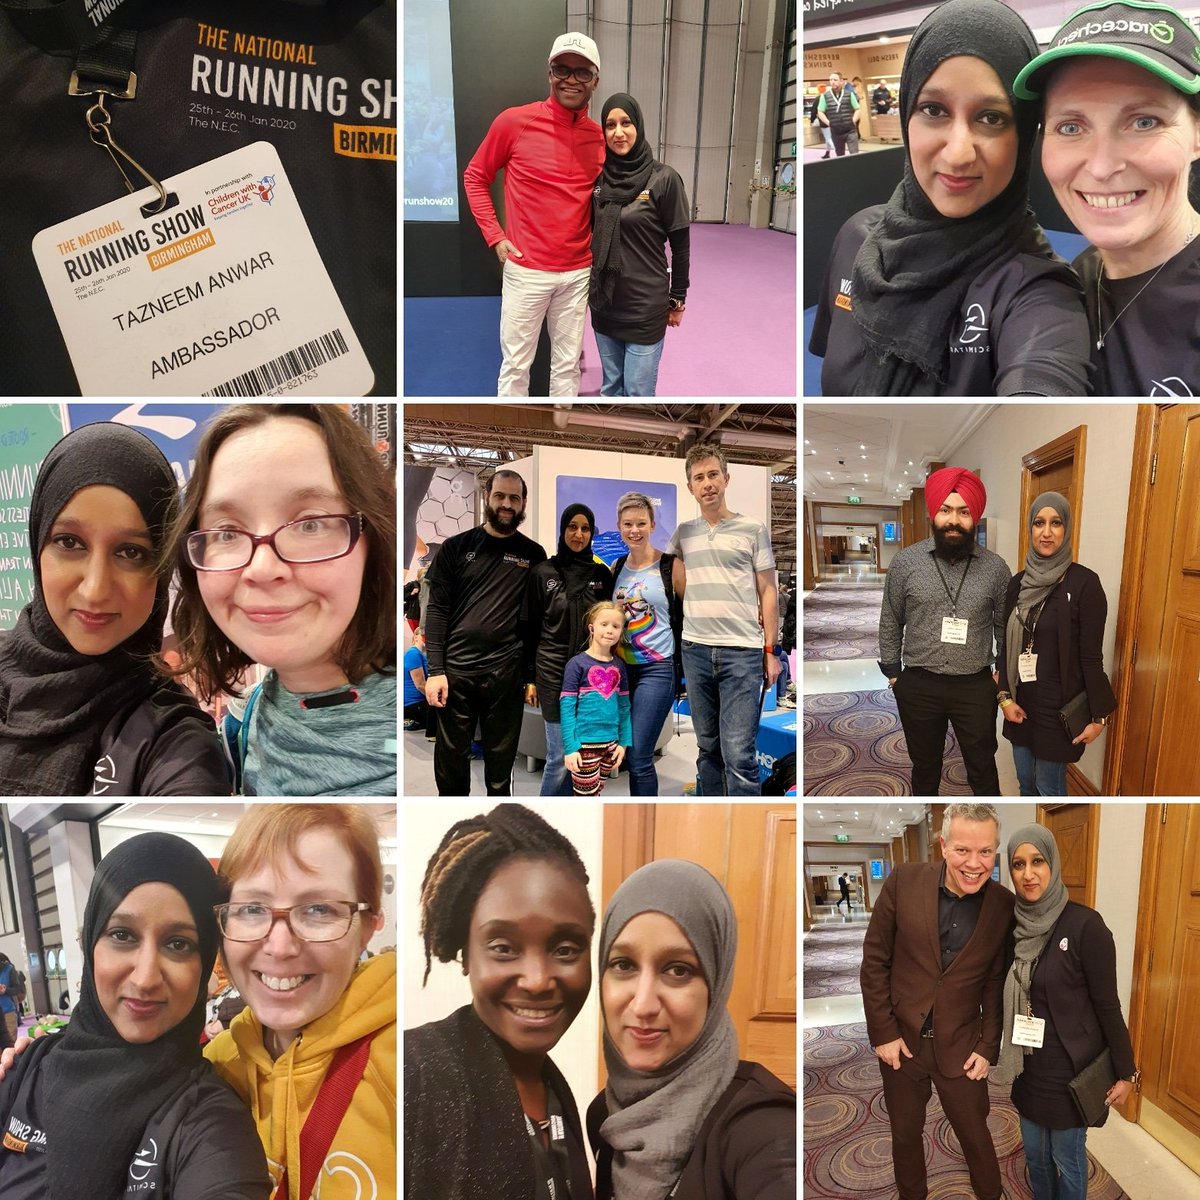 Well that's a wrap. What a fantastic 2 days at the @nationalrunshow. Got to meet so many amazing people, these are just some of them 💜.  Apologies if I didnt get a chance to meet you. Who's coming to the Running Show in London (13-14th June)? #nationalrunningshow